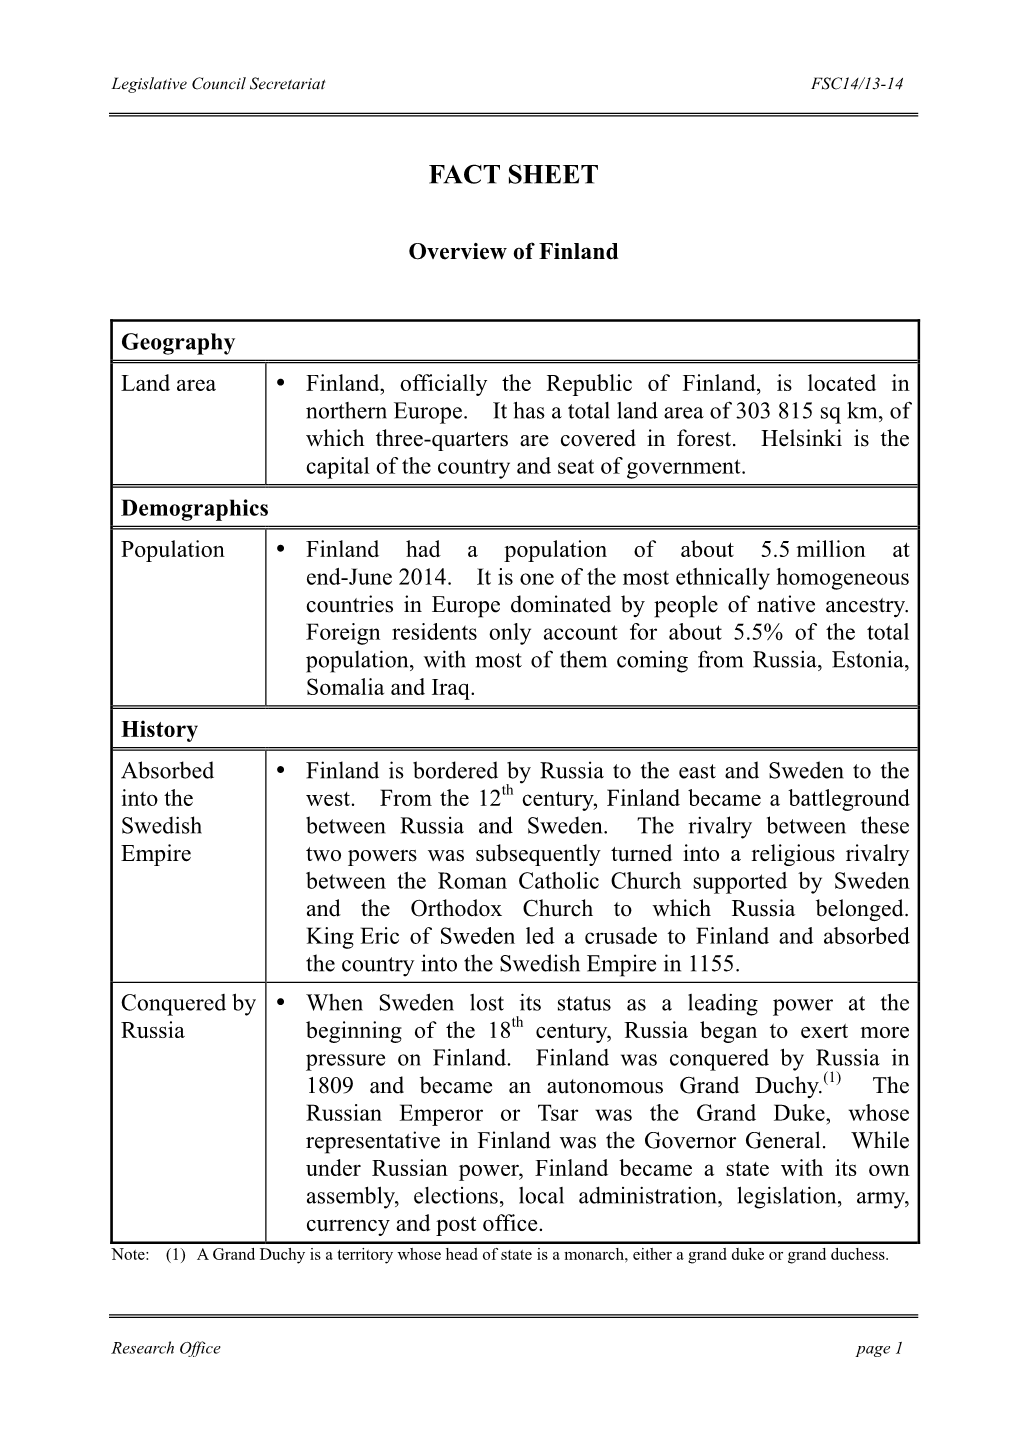 Fact Sheet on "Overview of Finland"